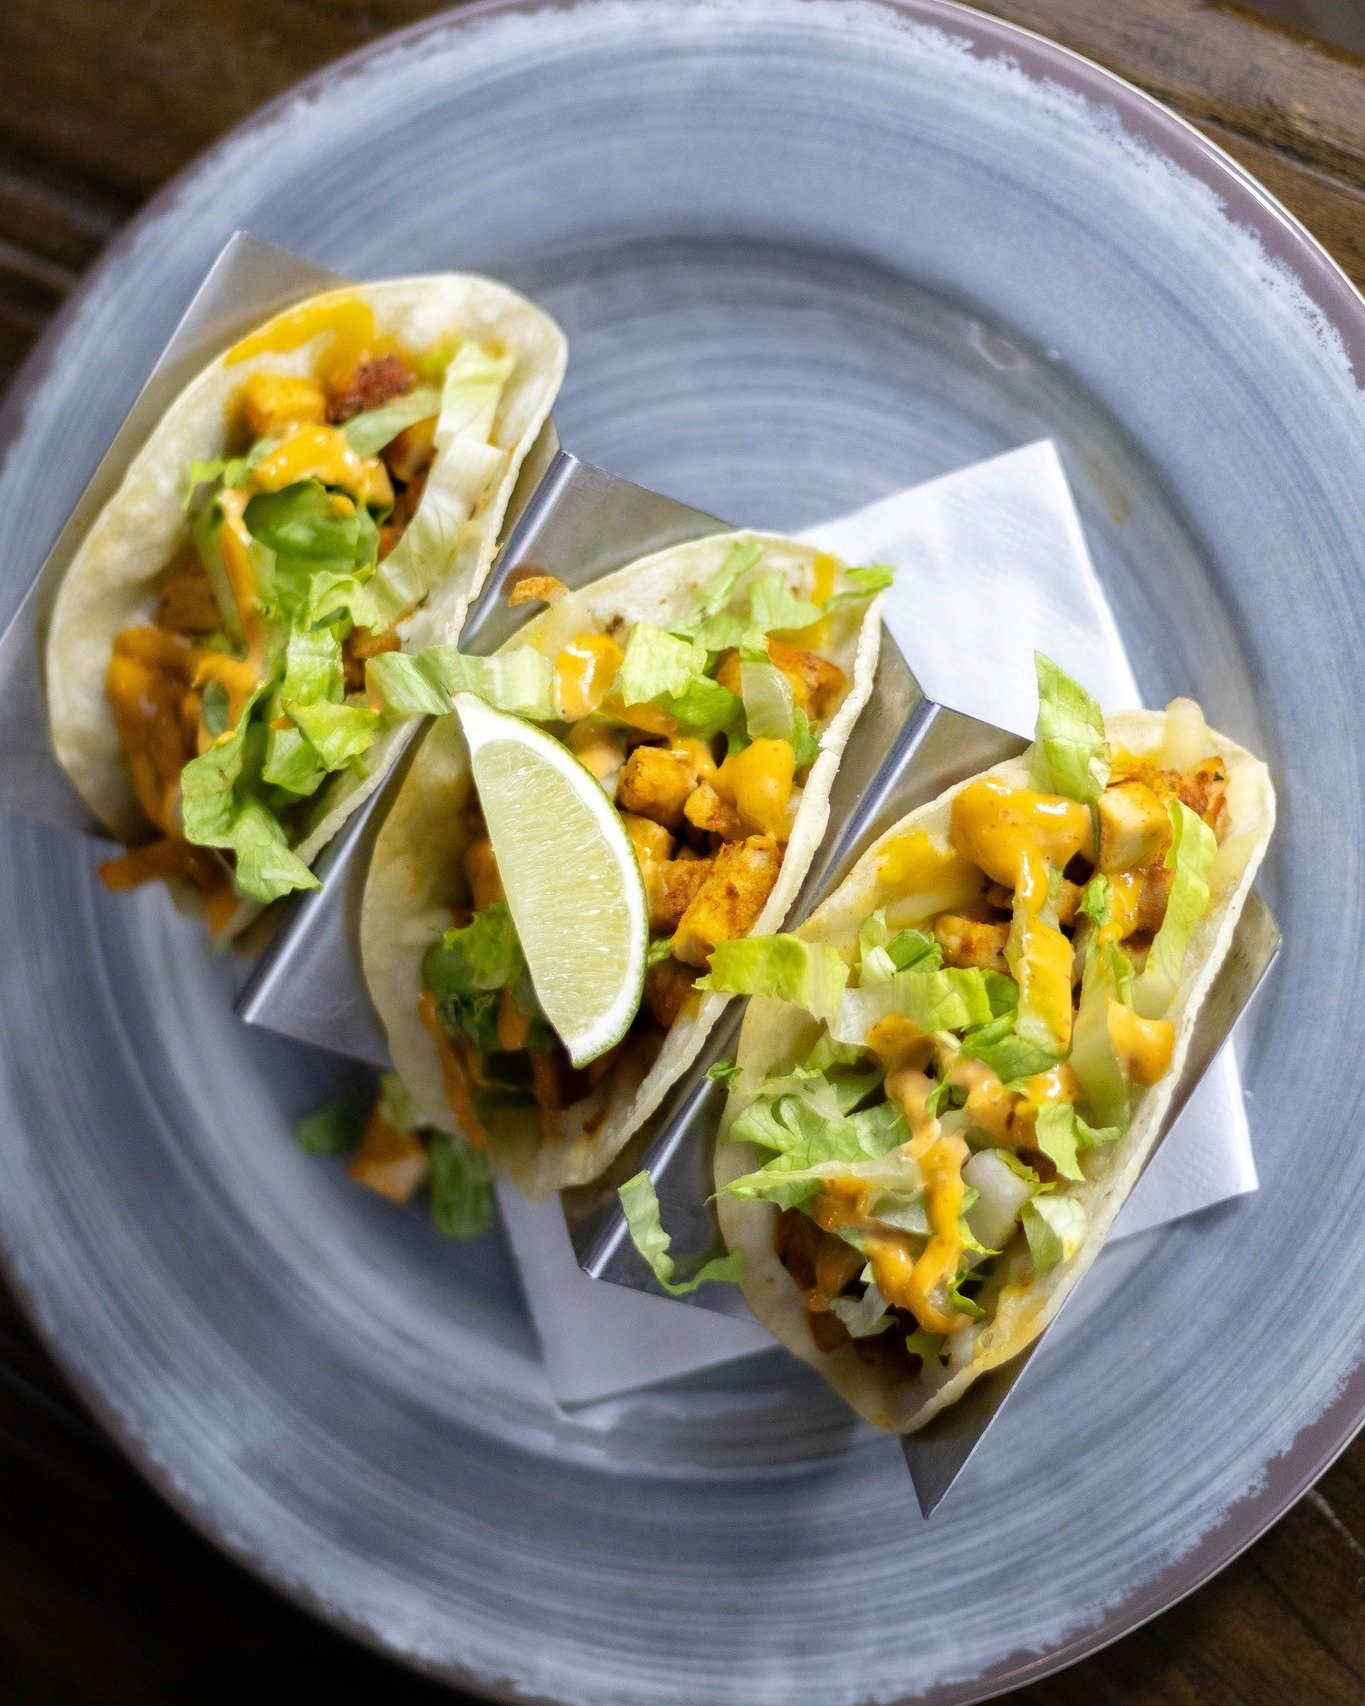 Happy Cinco de Mayo 🌮 We just switched up one of our street tacos &ndash; try our grilled chicken tacos with lettuce, cheese &amp; chipotle aioli along with a margarita!